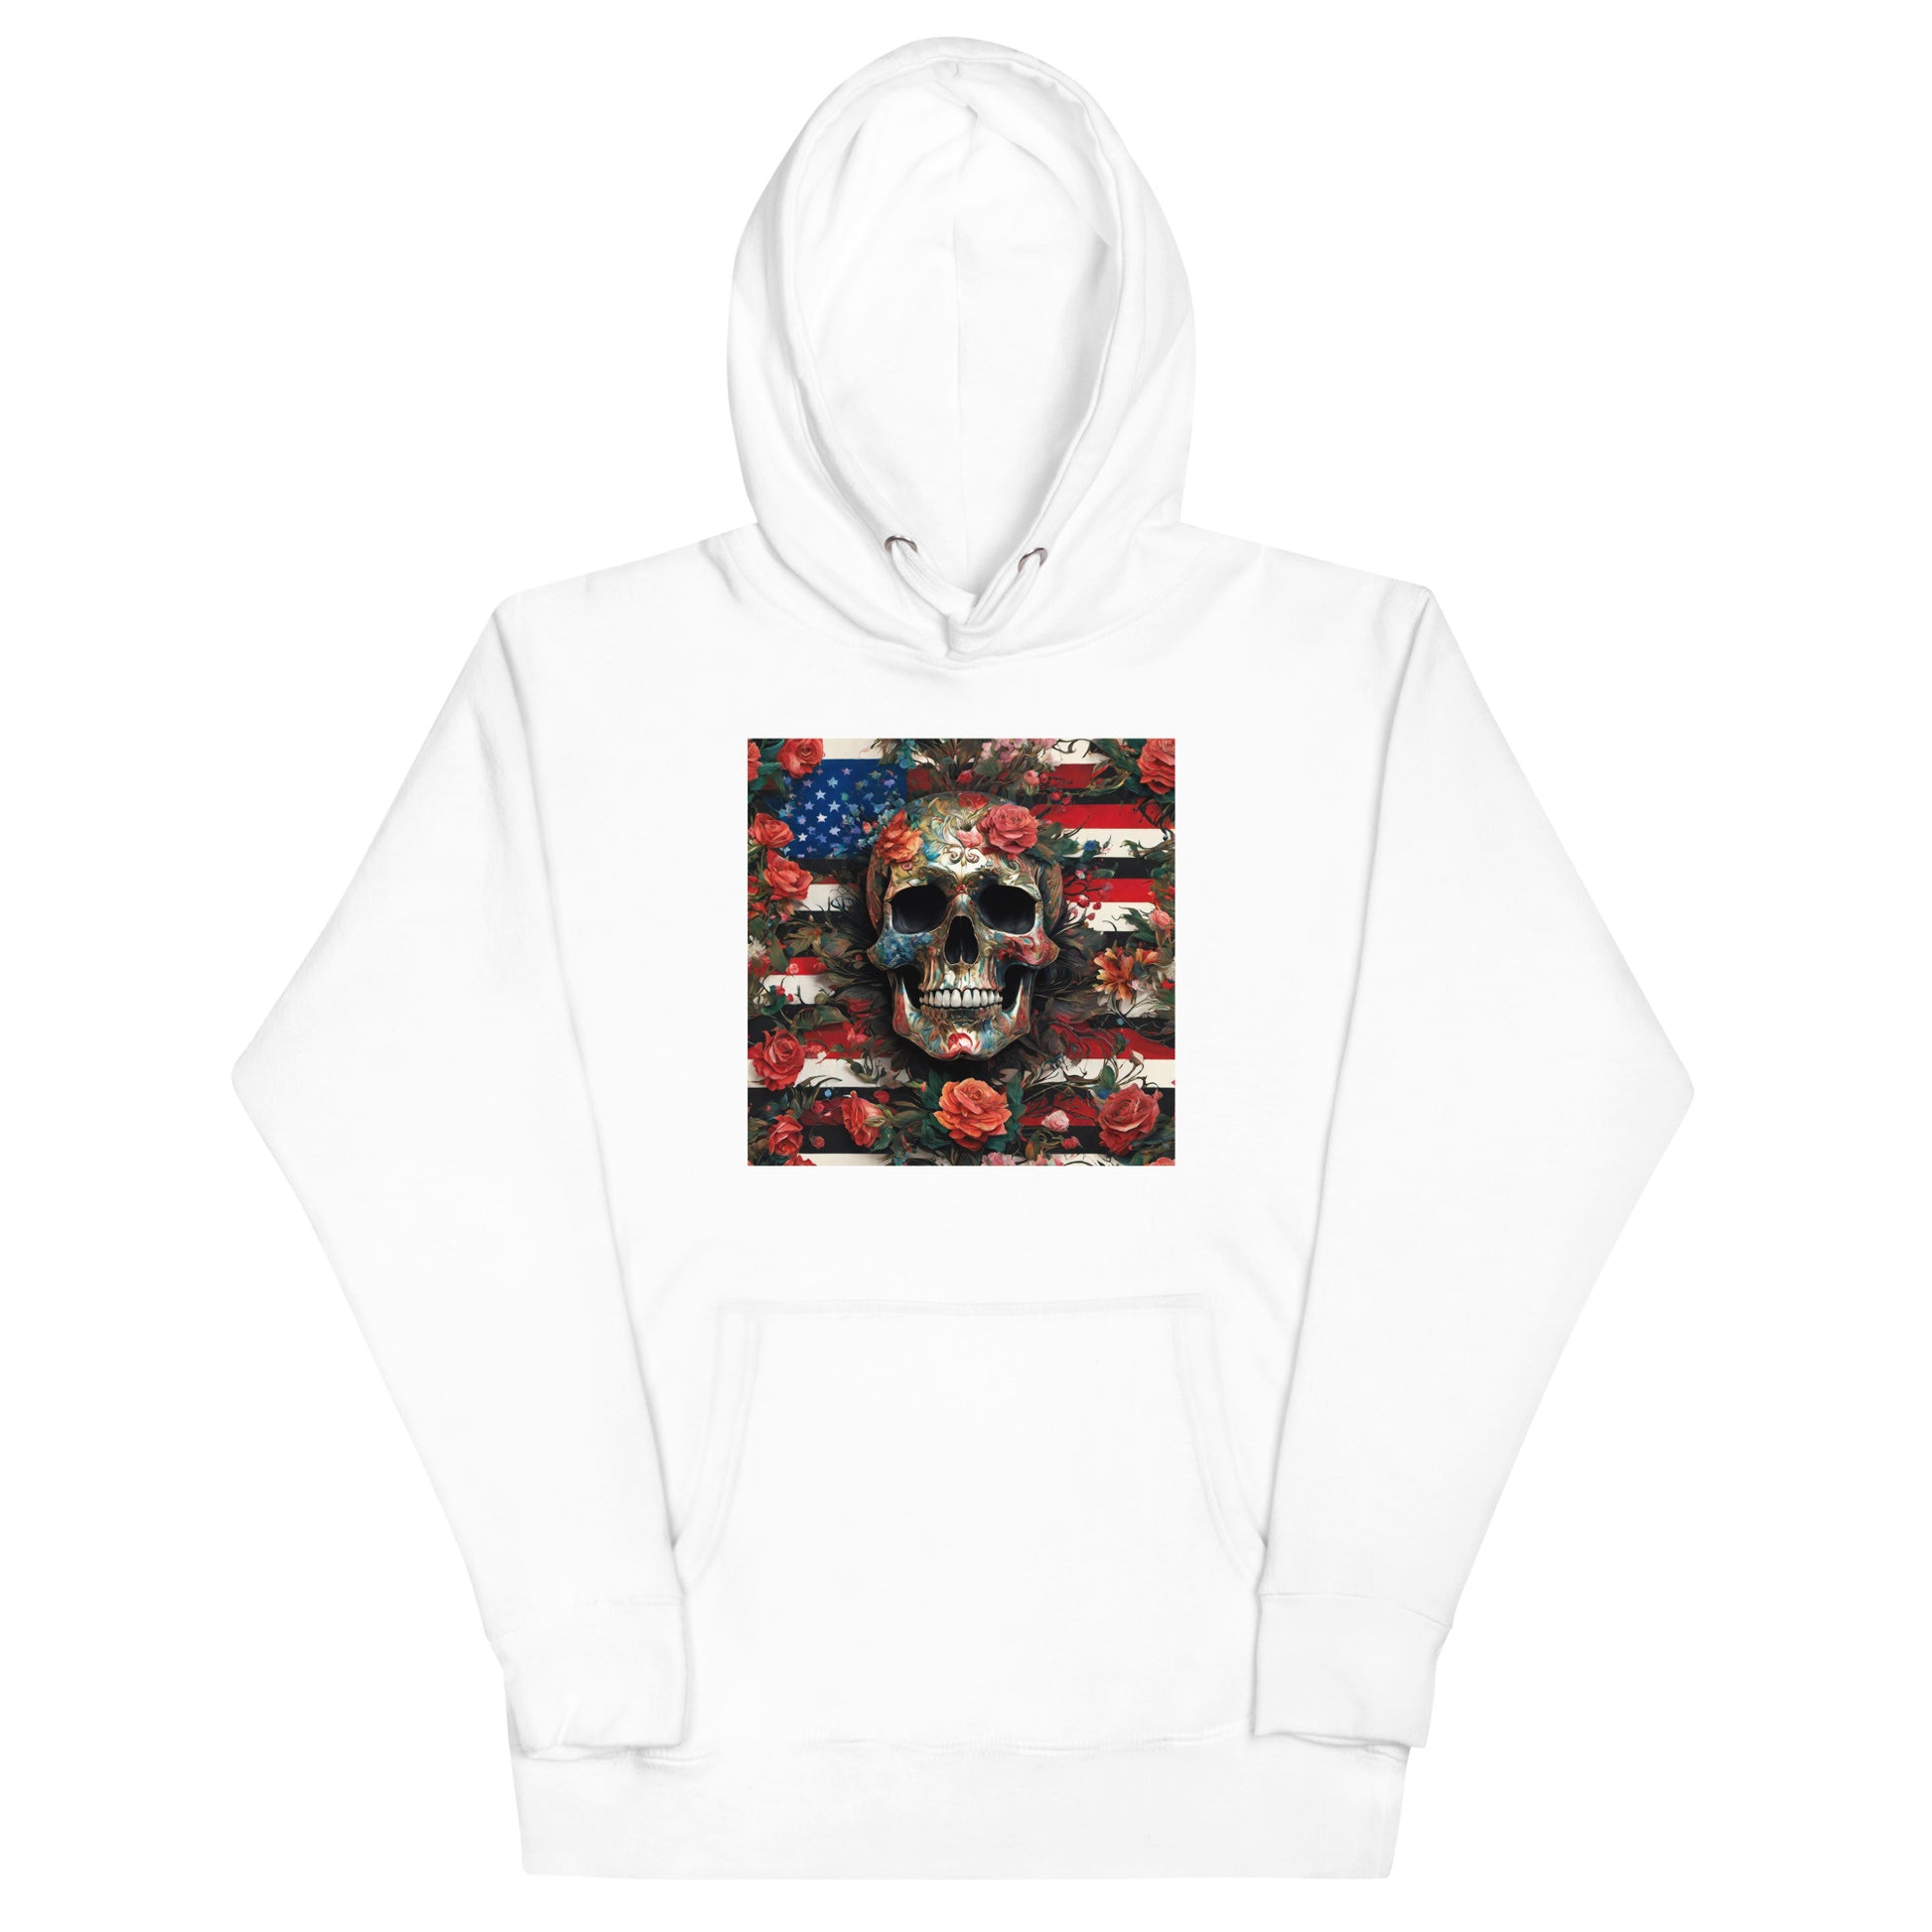 Skull, Roses, and Flag Graphic Hoodie White